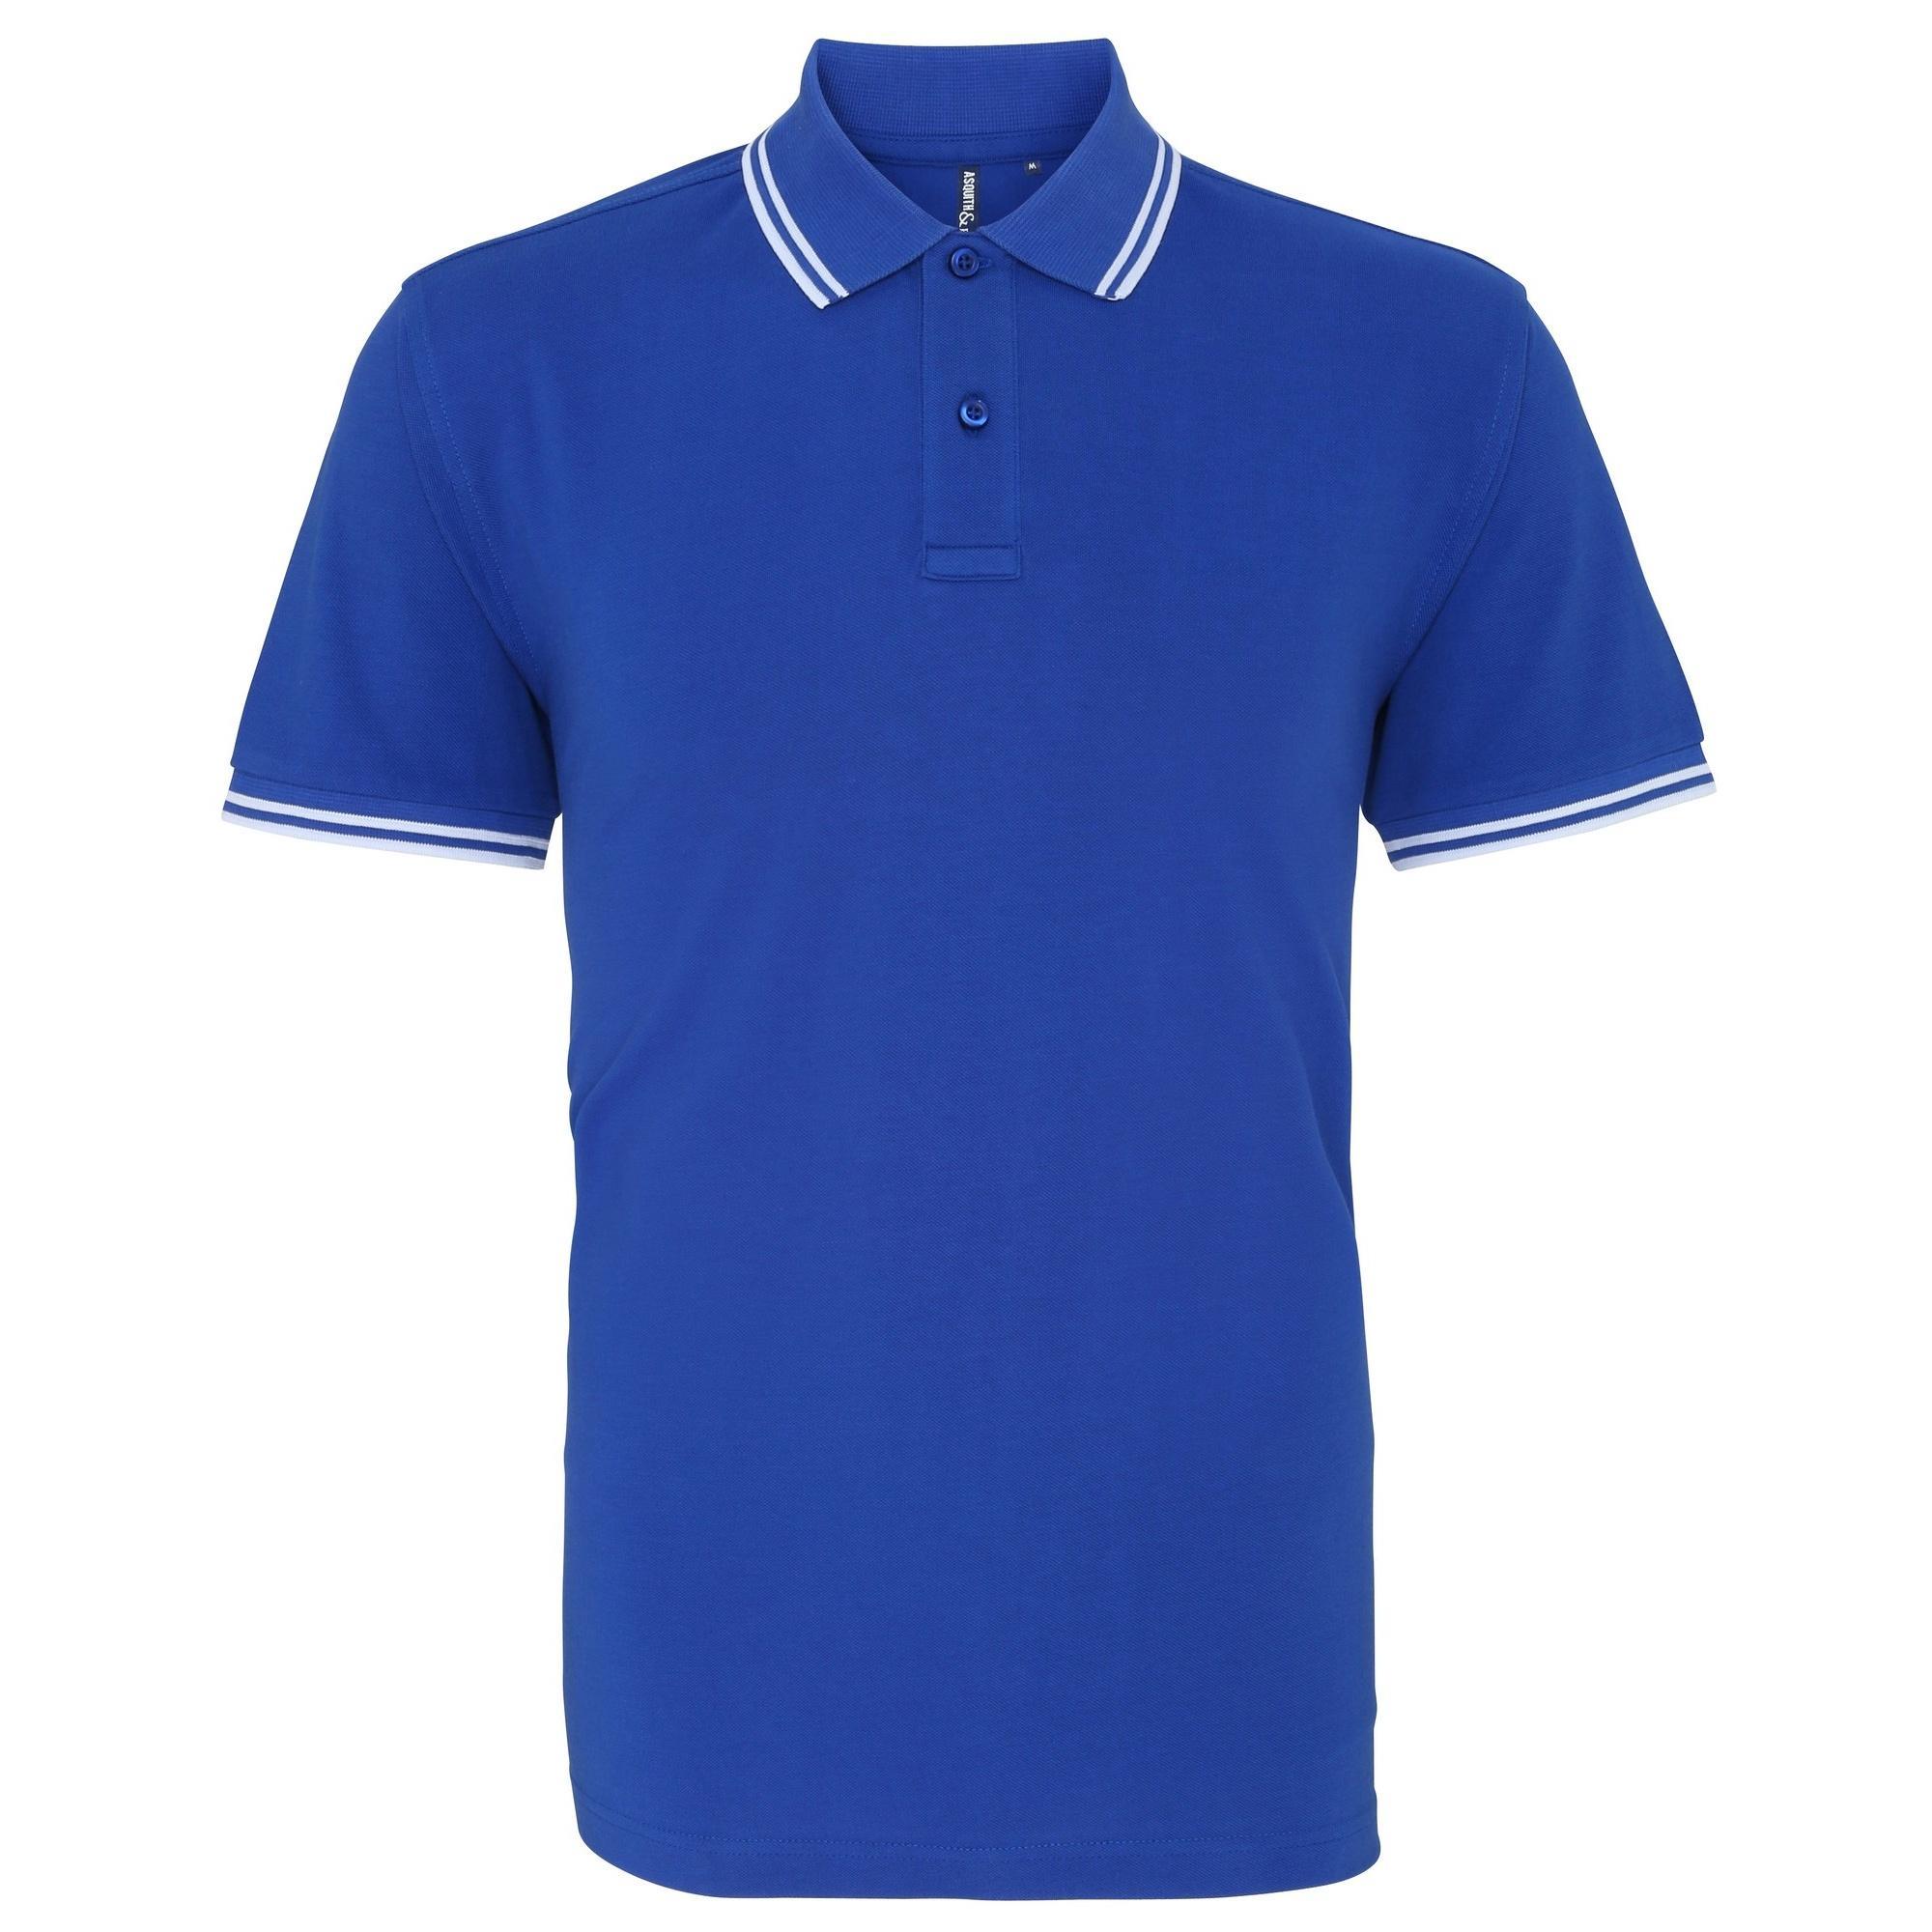 Asquith & Fox Mens Classic Fit Tipped Polo Shirt (Royal/ White) (2XL)